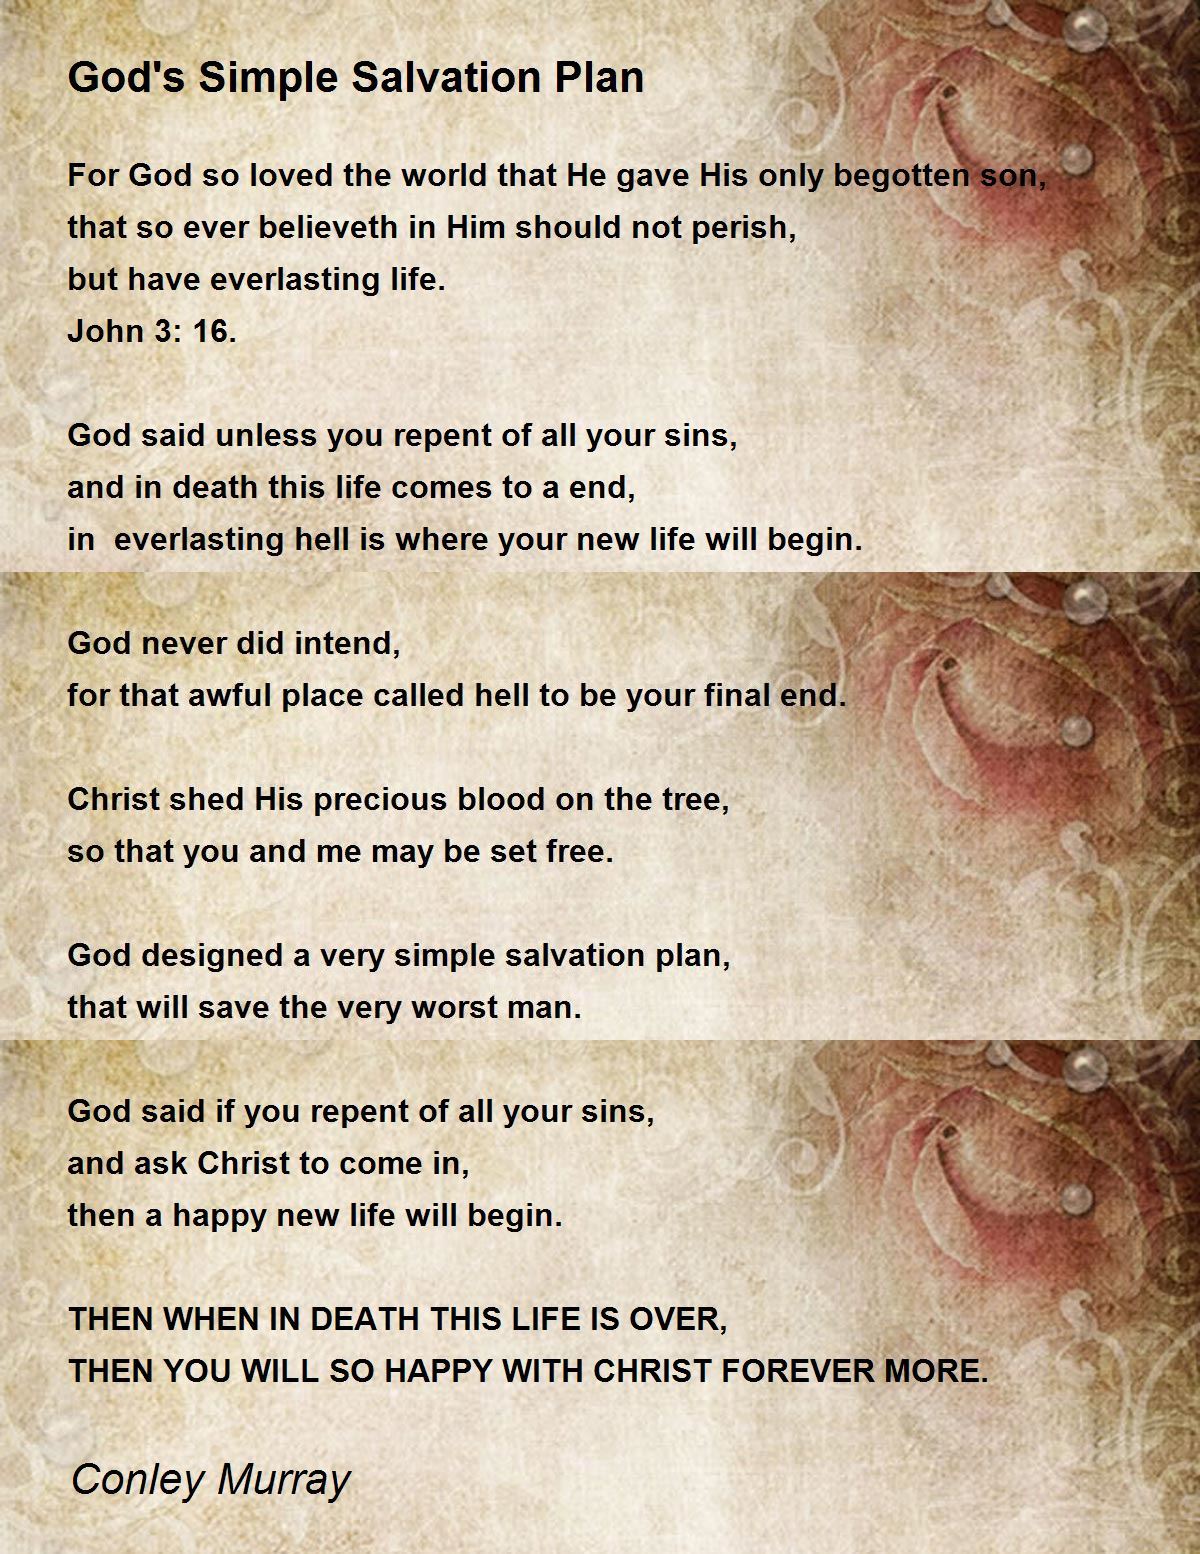 god's simple salvation plan poem by conley murray - poem